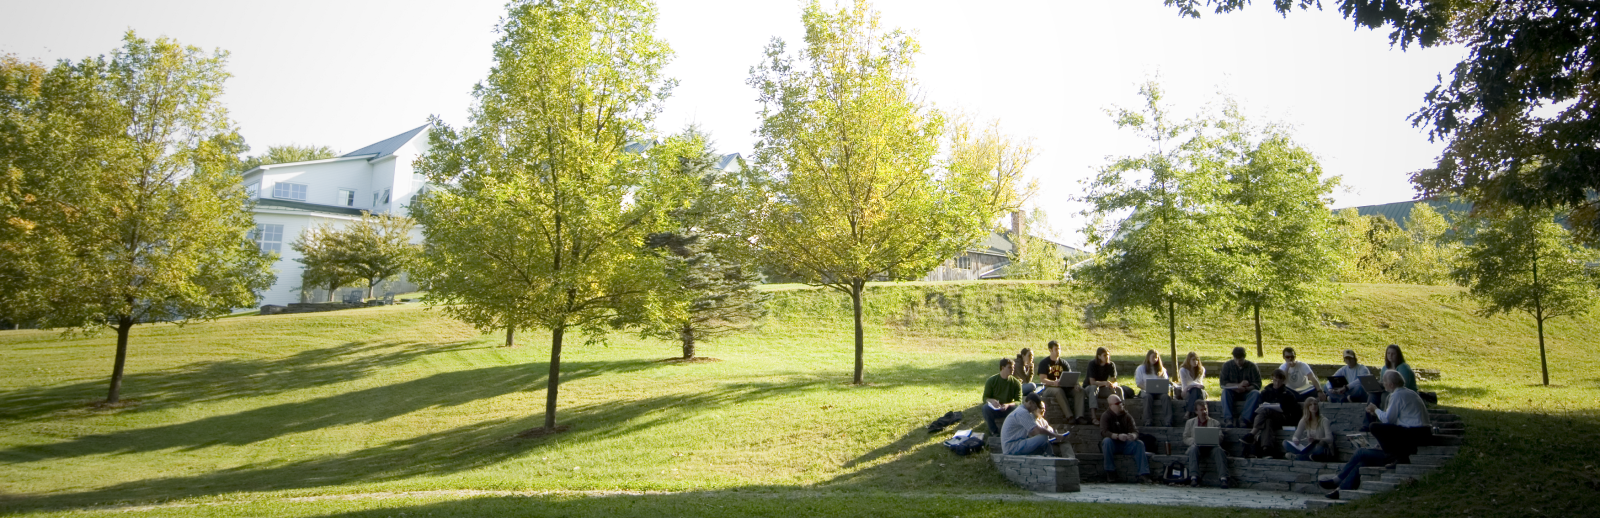 Students at Vermont Law School campus in an outdoor classroom.